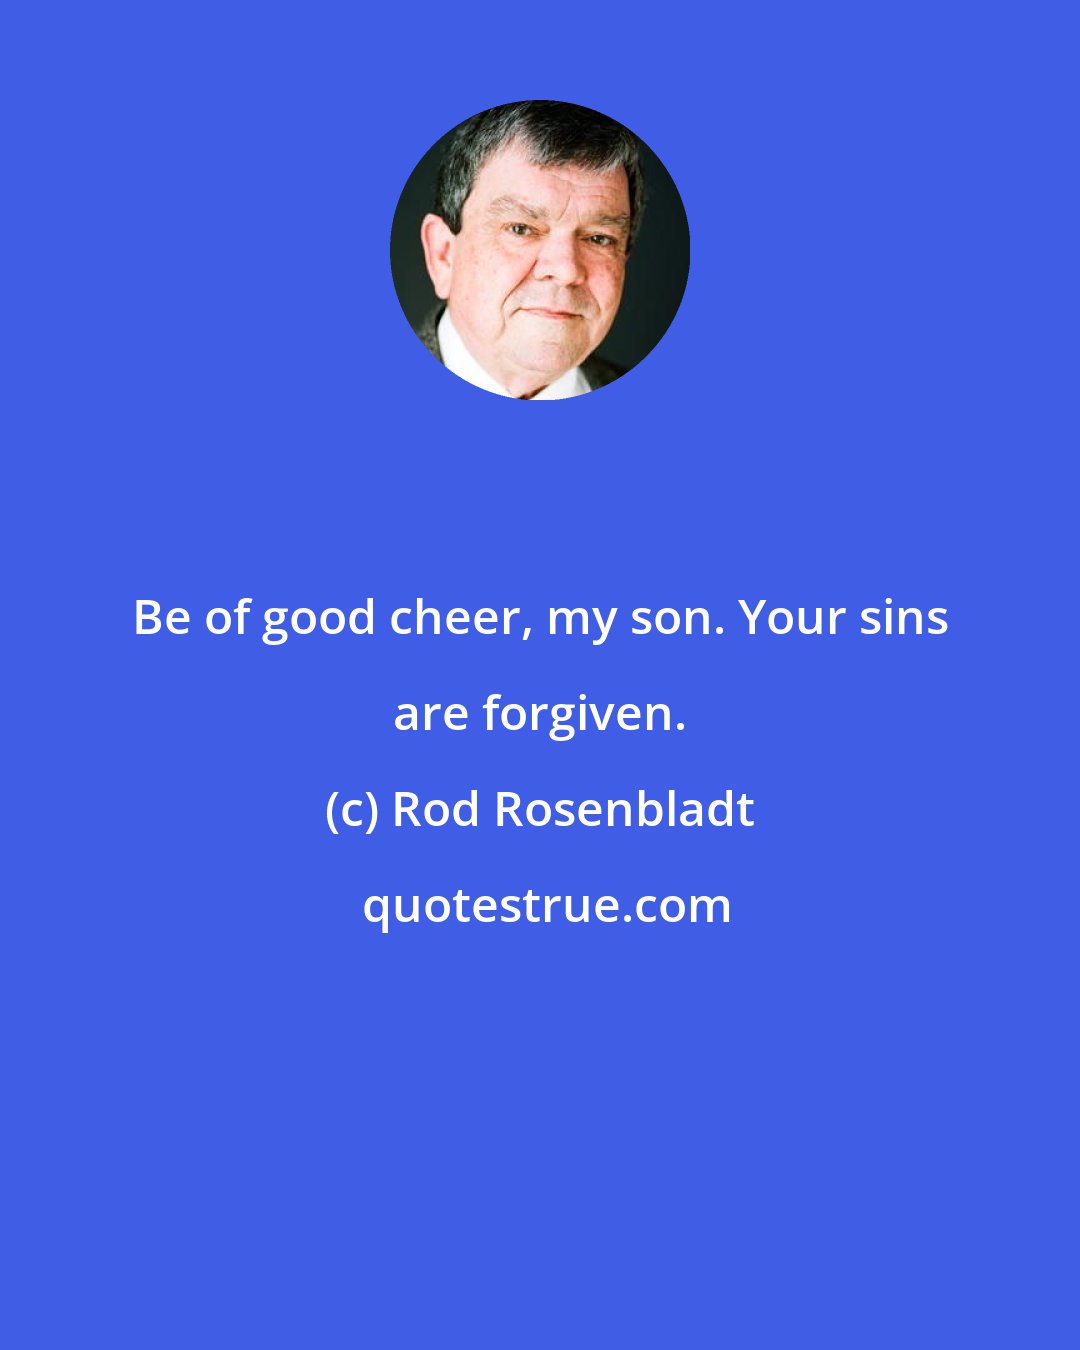 Rod Rosenbladt: Be of good cheer, my son. Your sins are forgiven.